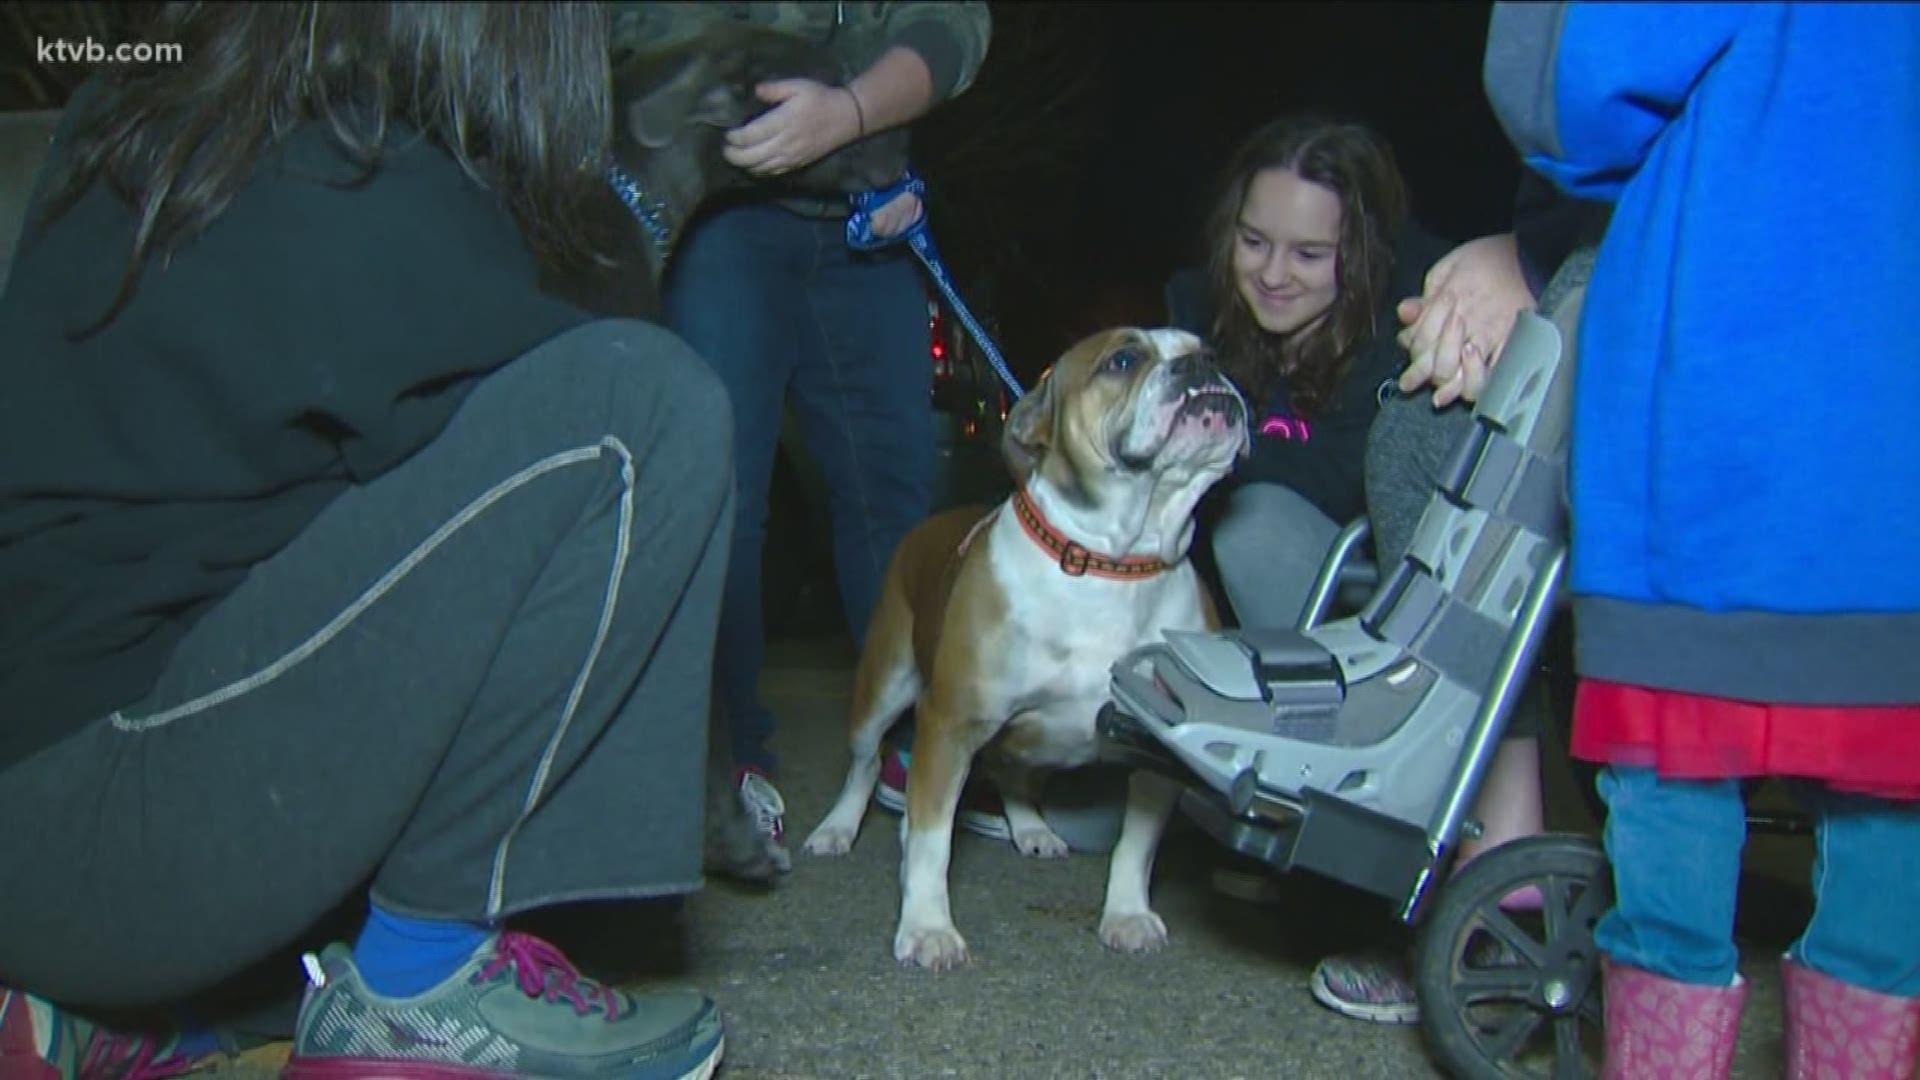 A family, who lost their home to the Camp Fire in California, was reunited with their dogs thanks to a group of Good Samaritans that brought them to Idaho.